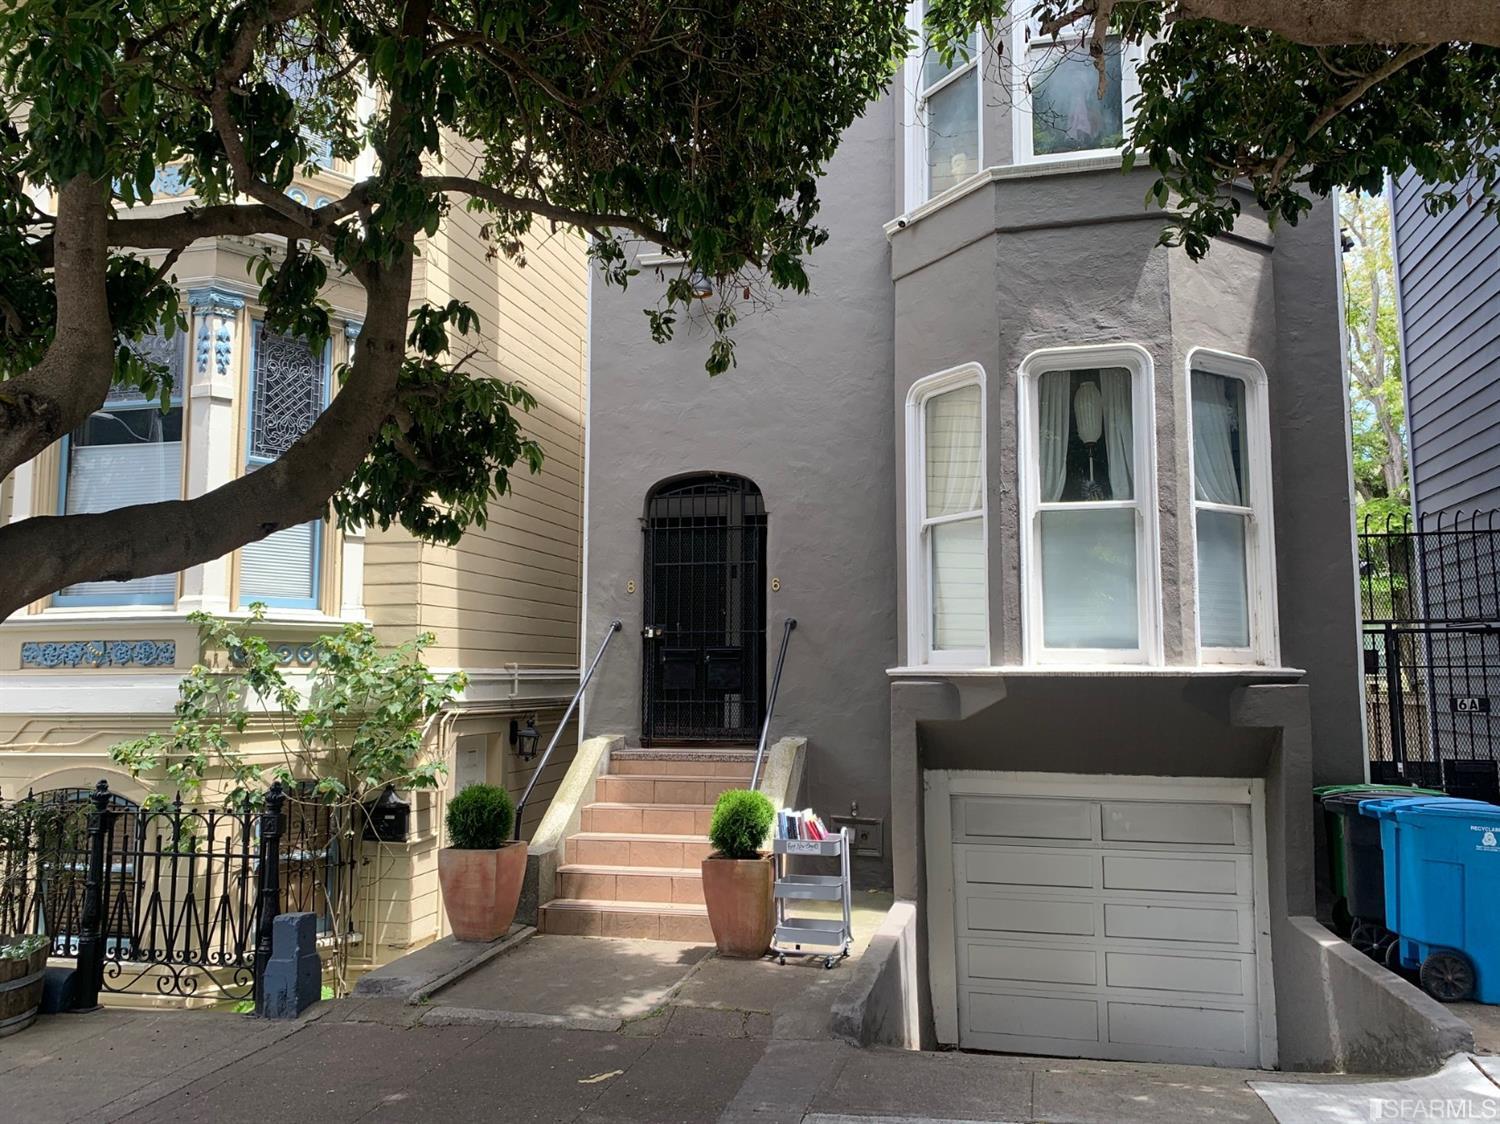 Splendid Edwardian triplex in a beautiful detached Edwardian on a coveted street in an excellent location close to NOPA’s vibrant Divisadero corridor and Alamo Square.